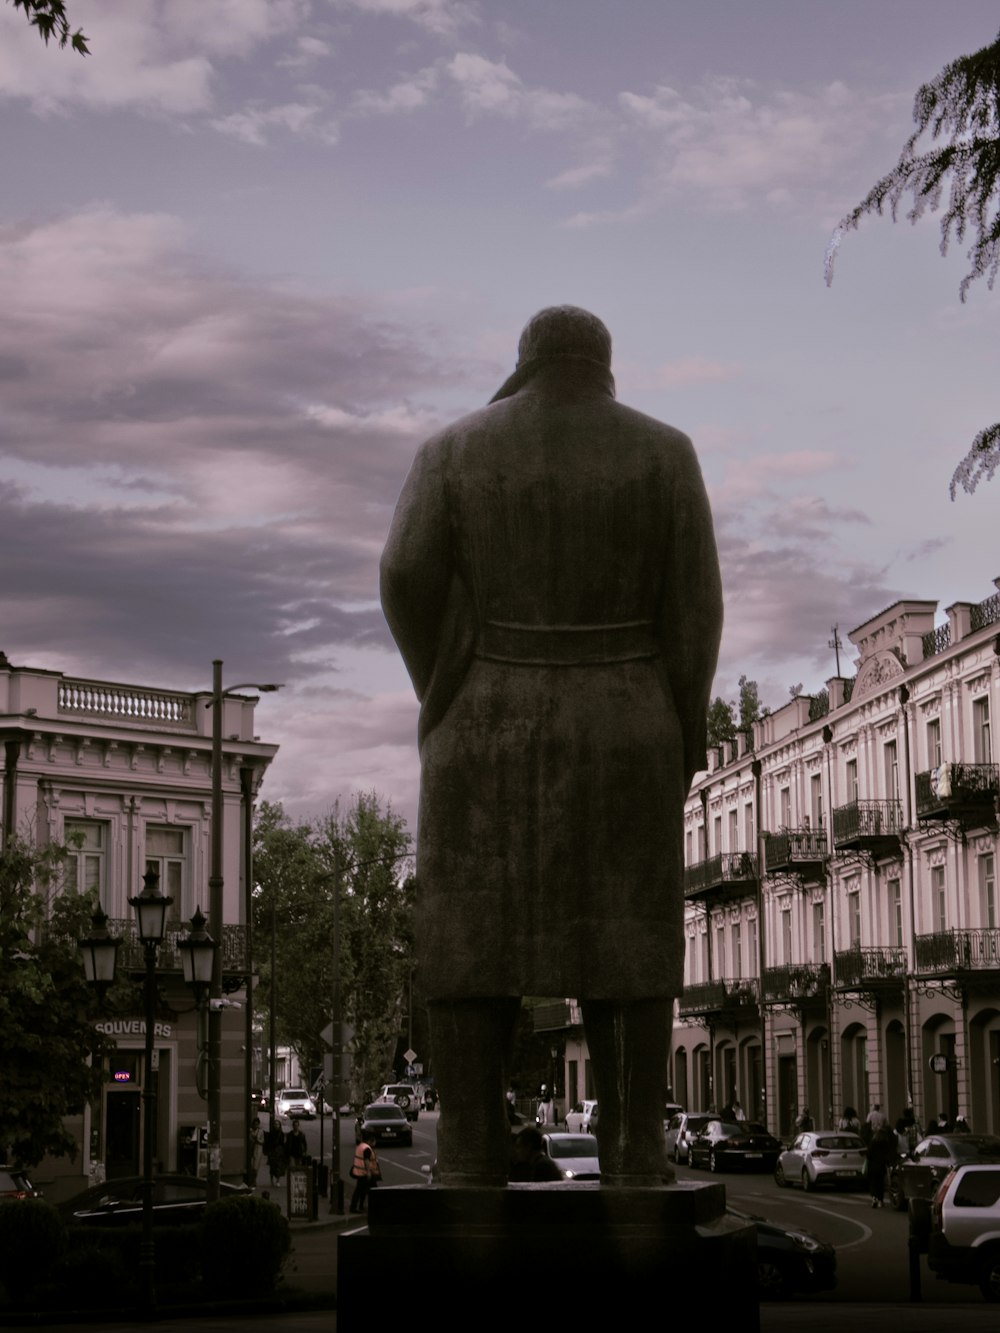 a statue of a man standing in the middle of a street